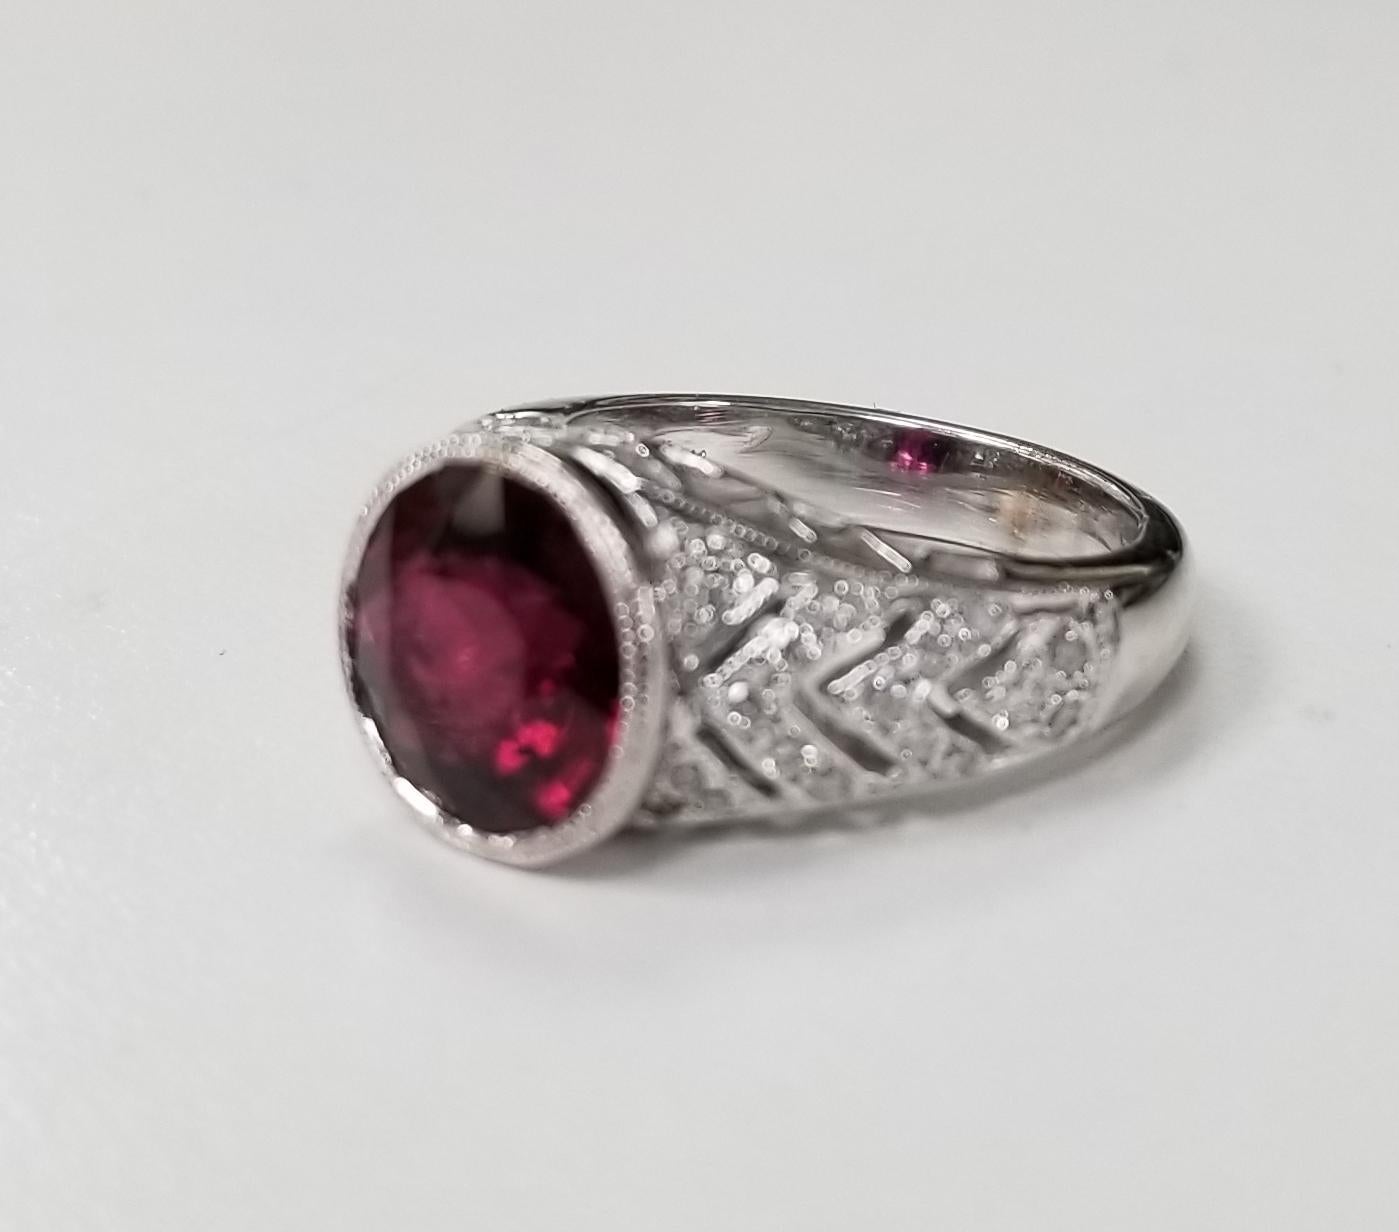 14k white gold garnet and diamond ring, containing 1 round garnet of gem quality weighing 2.98cts. and 38 round full cut diamonds weighing .45pts.  This ring is a size 5.5 but we will size to fit for free.